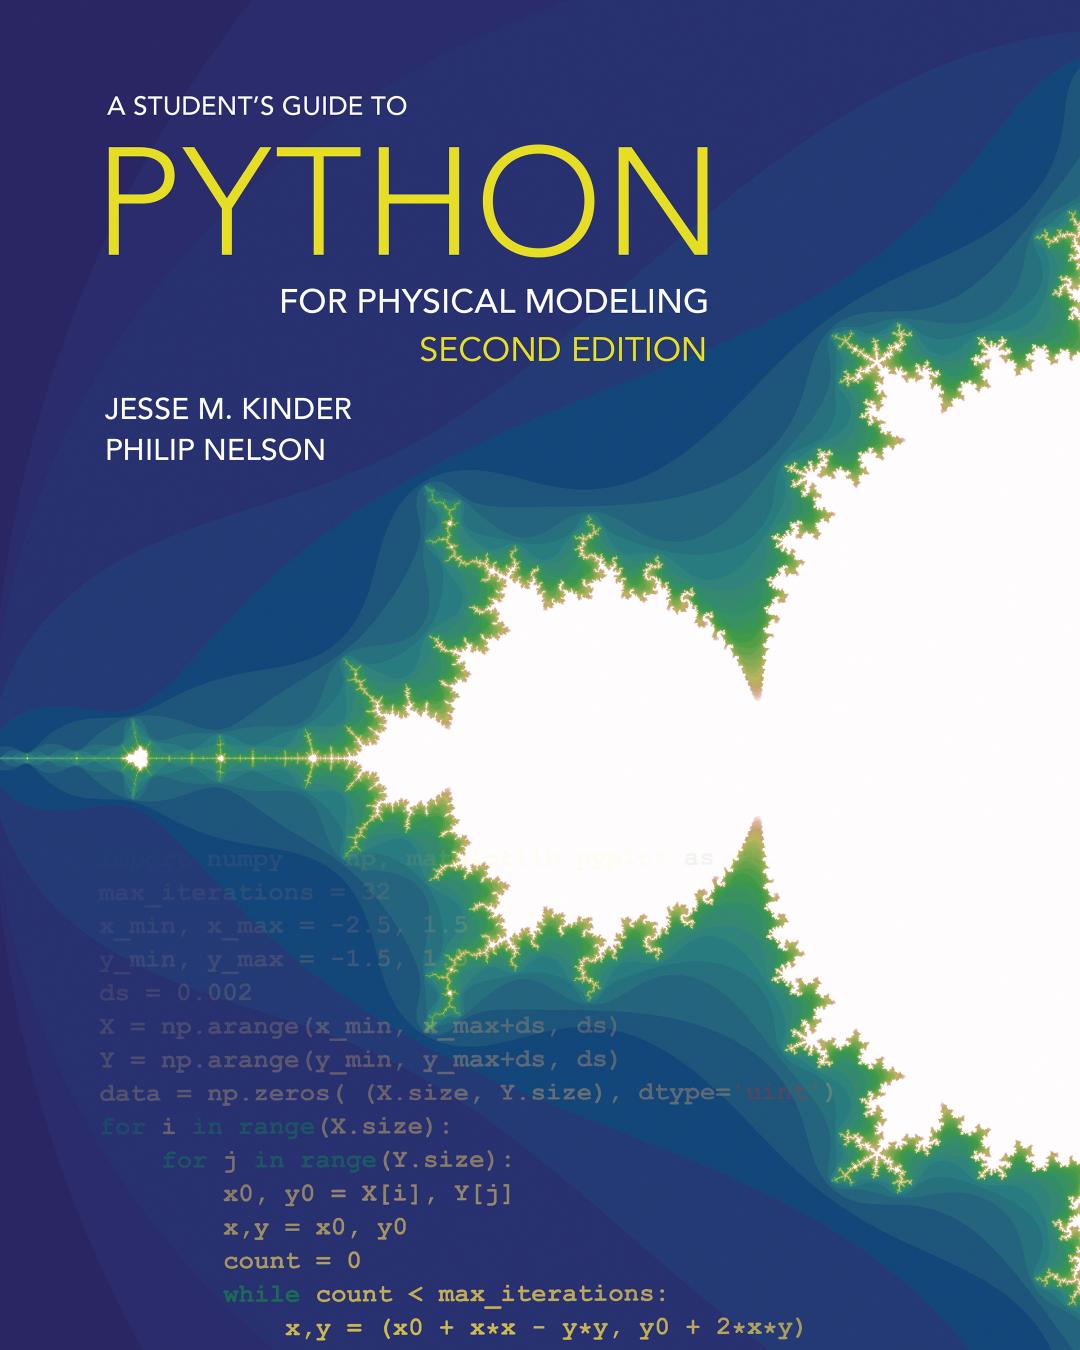 A Student's Guide to Python for Physical Modeling: Second Edition by Jesse M. Kinder Philip Nelson